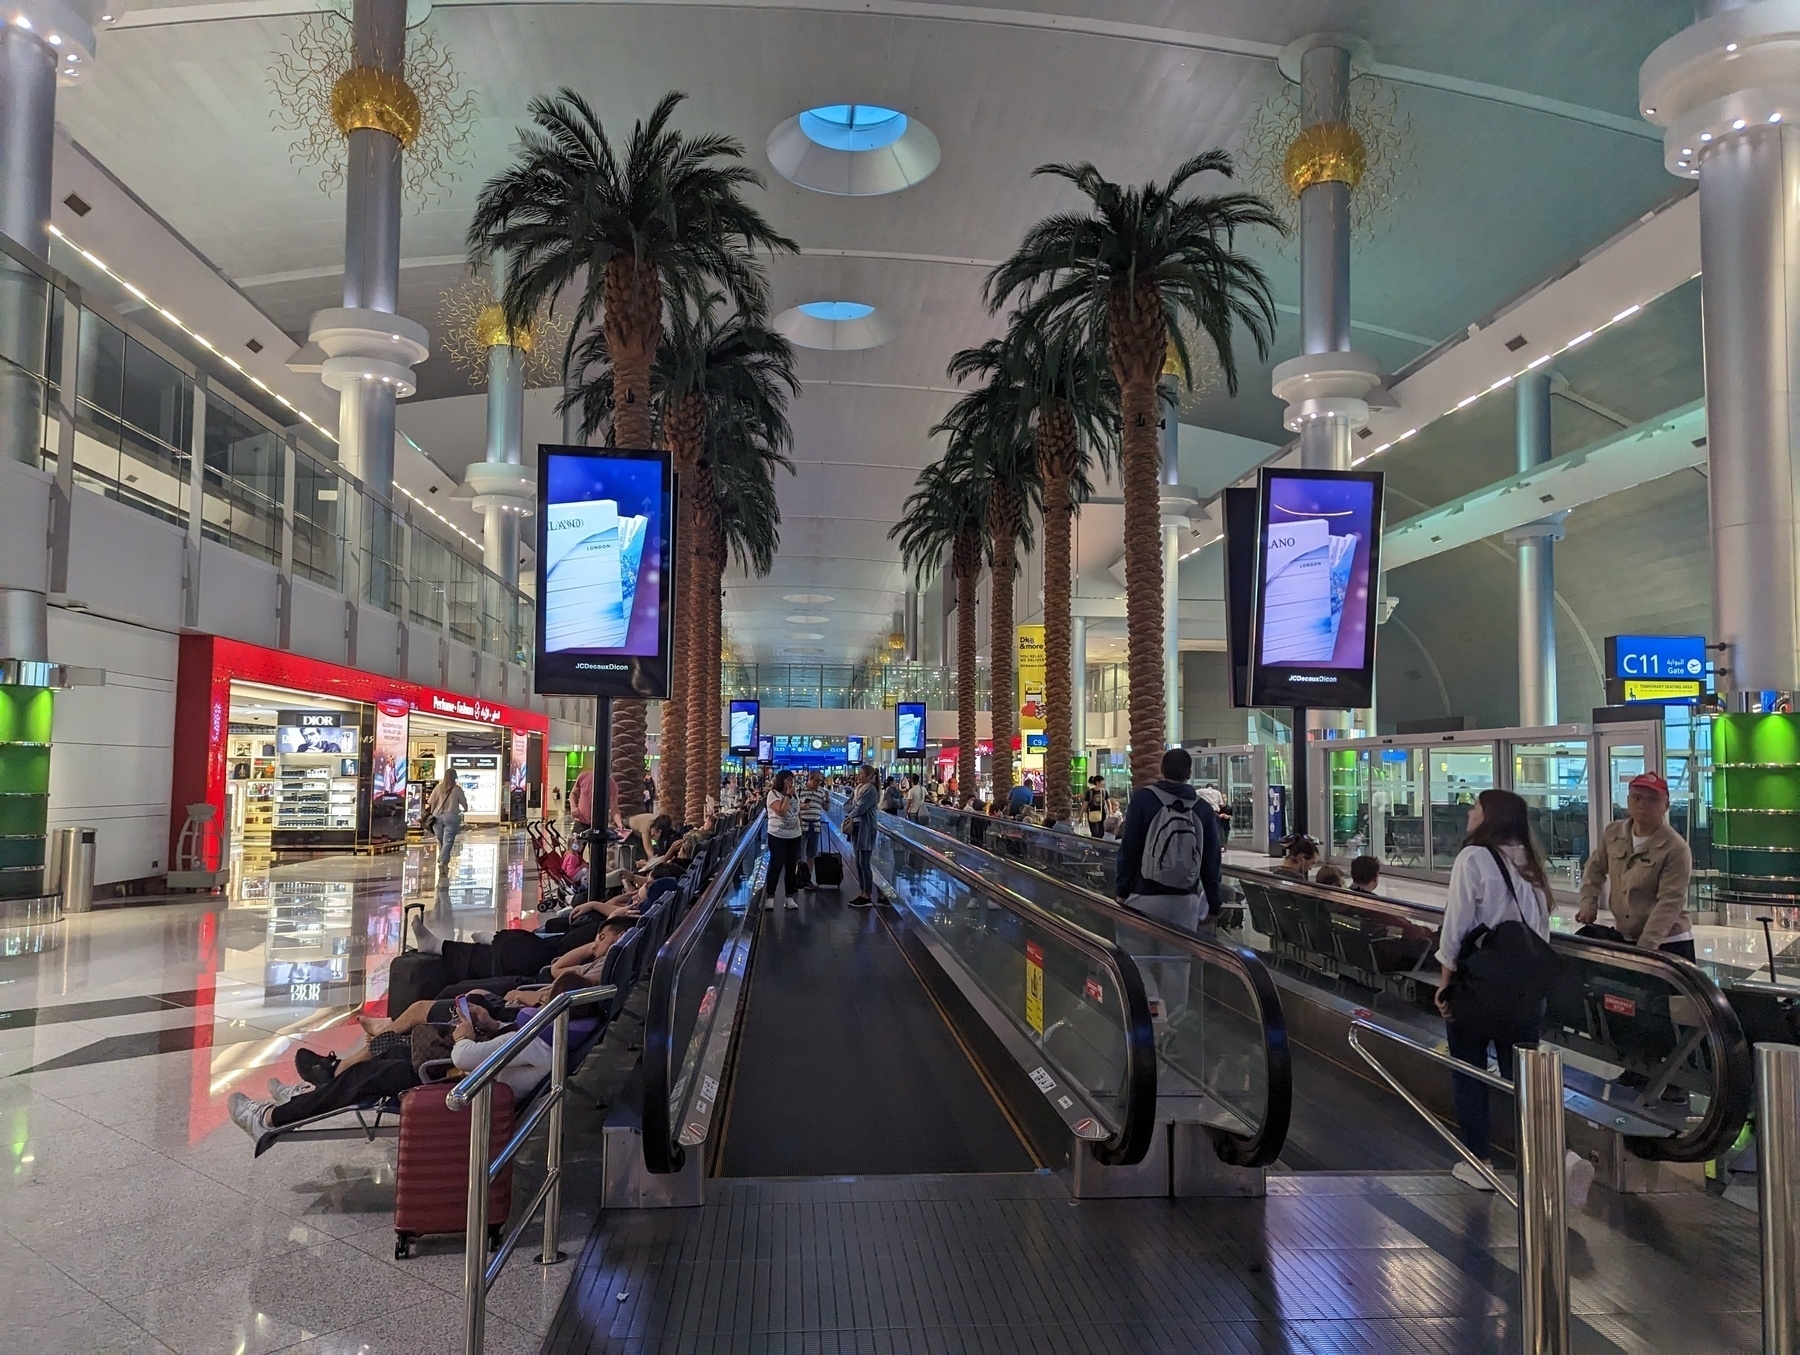 Inside the terminal of Dubai International Airport, looking at palm trees next to a travelator.